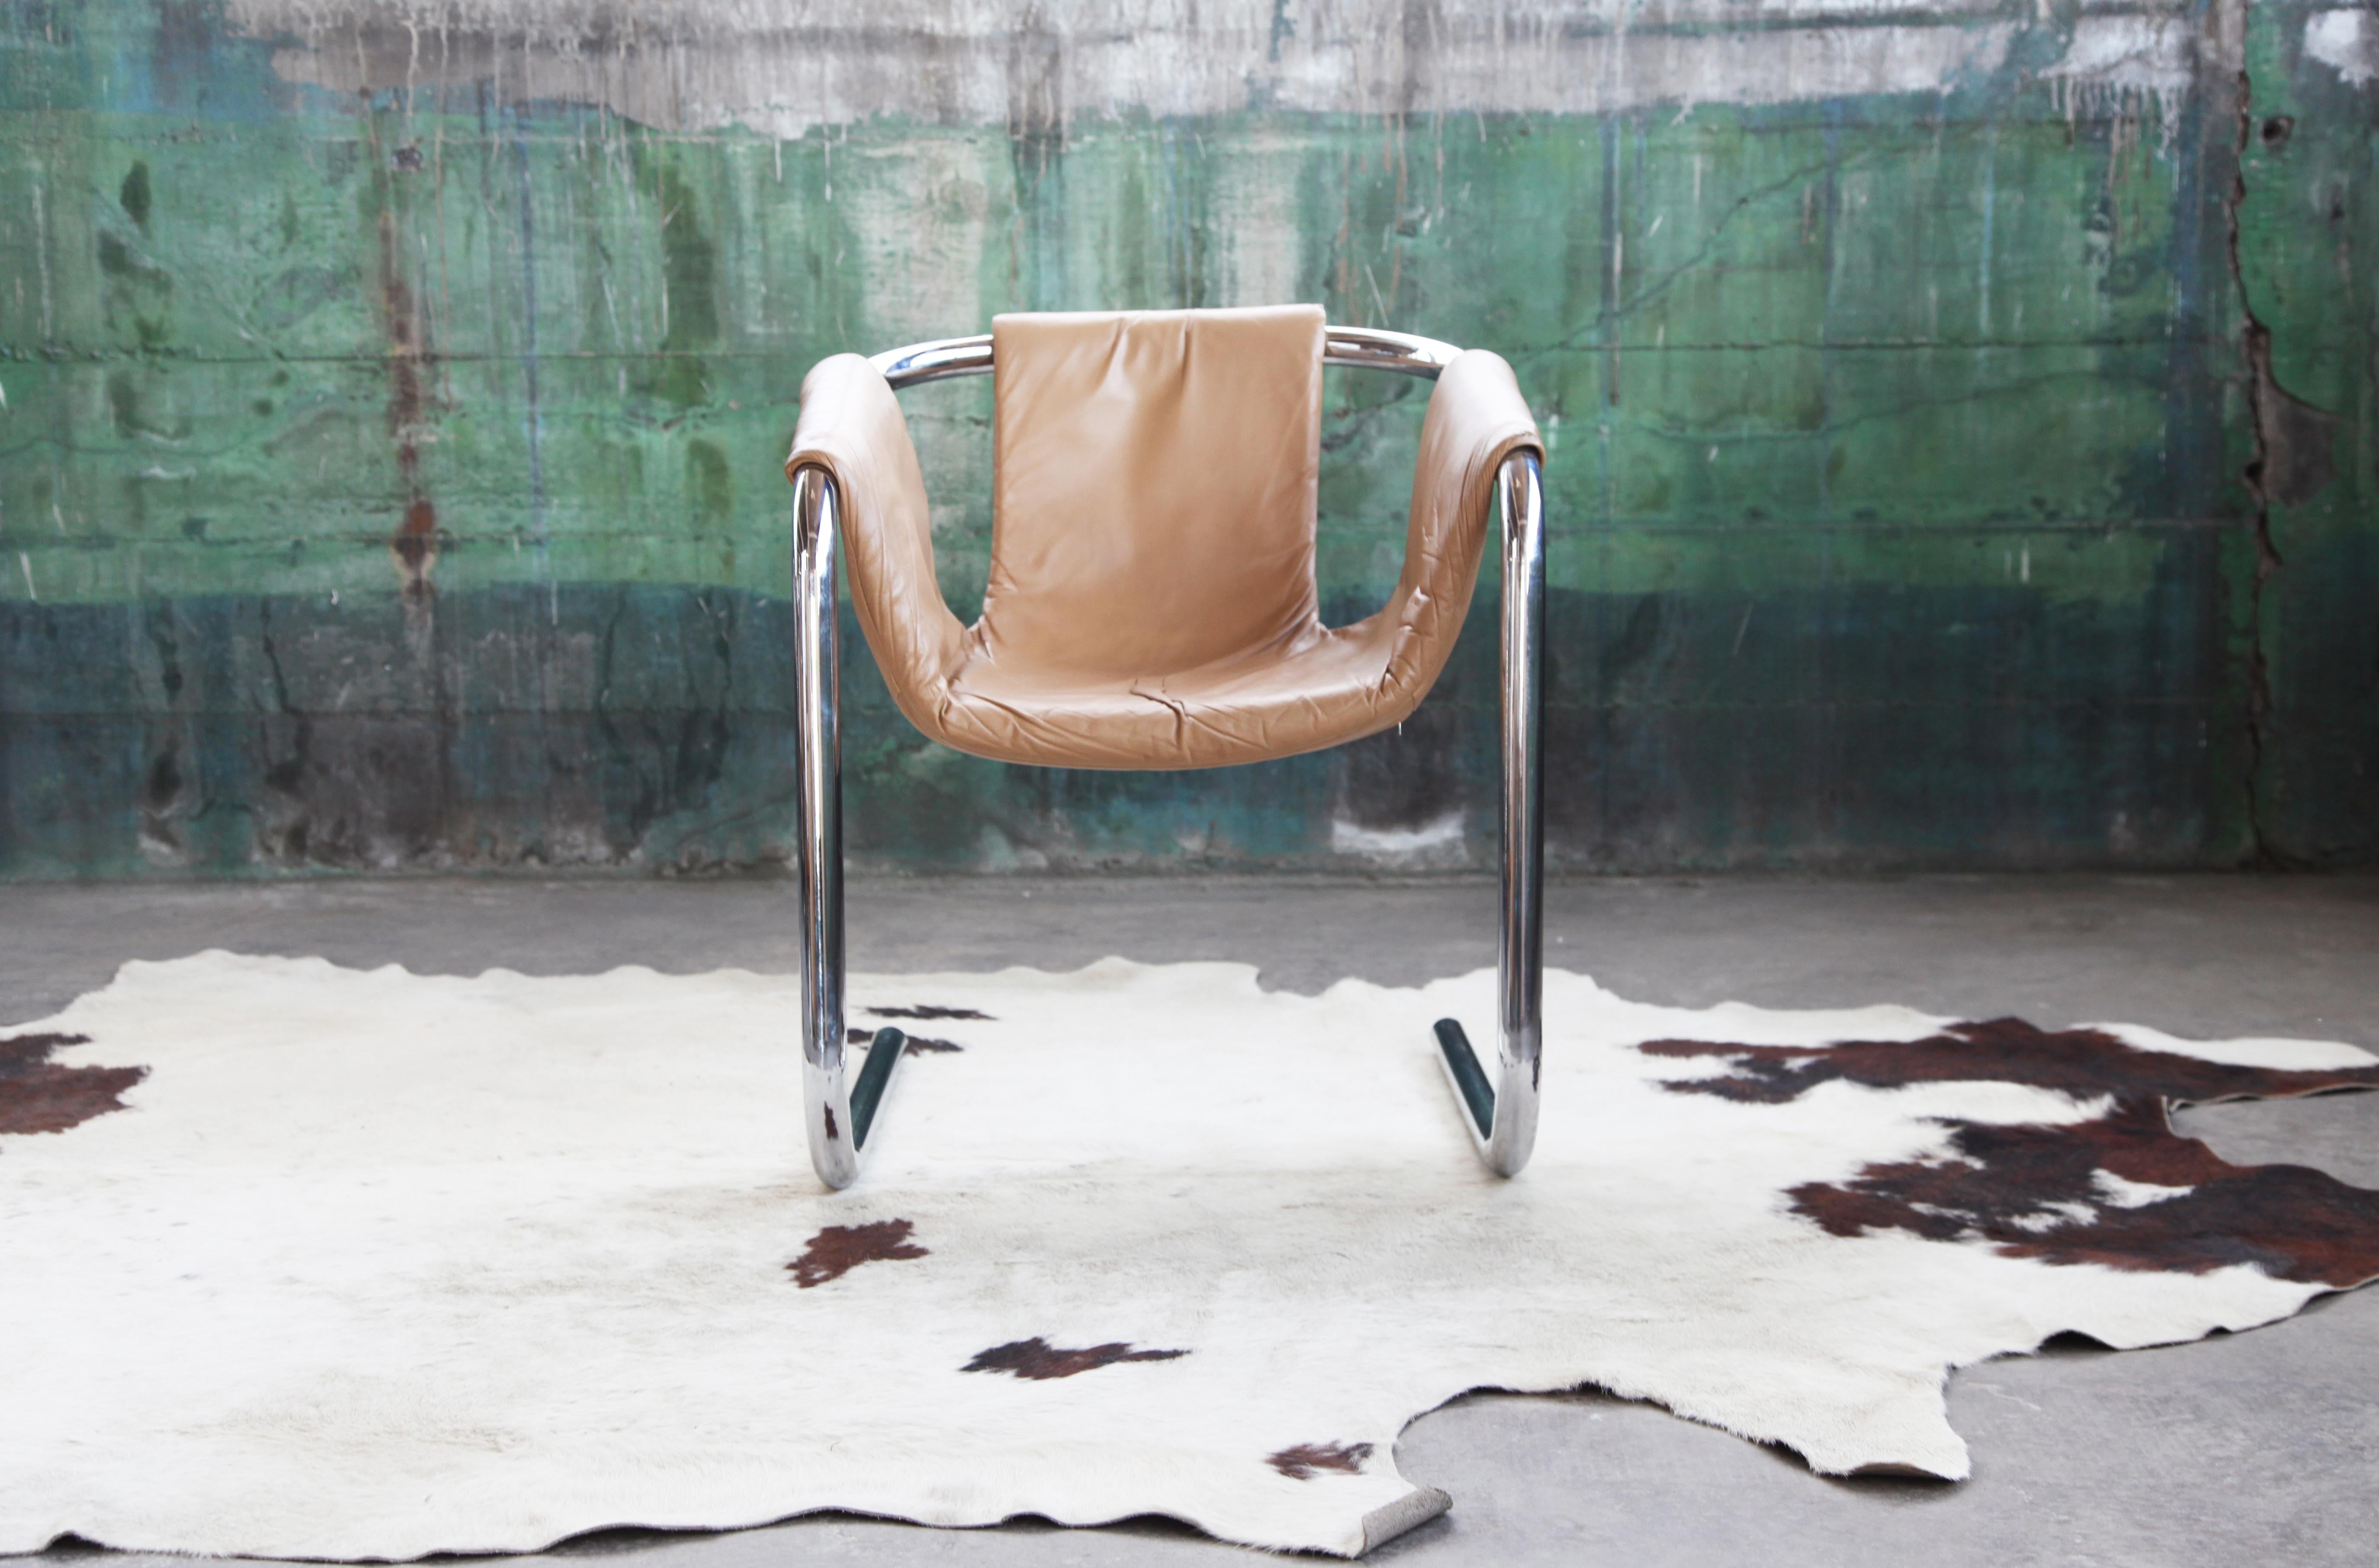 Stunning, and very rare, substantial Postmodern sling Vecta Zermatt lounge chair designed by Duncan Burke and Gunter Eberle for Vecta Group and manufactured in Italy. Each is sold individually, and we have 2 left available in excellent shape. This